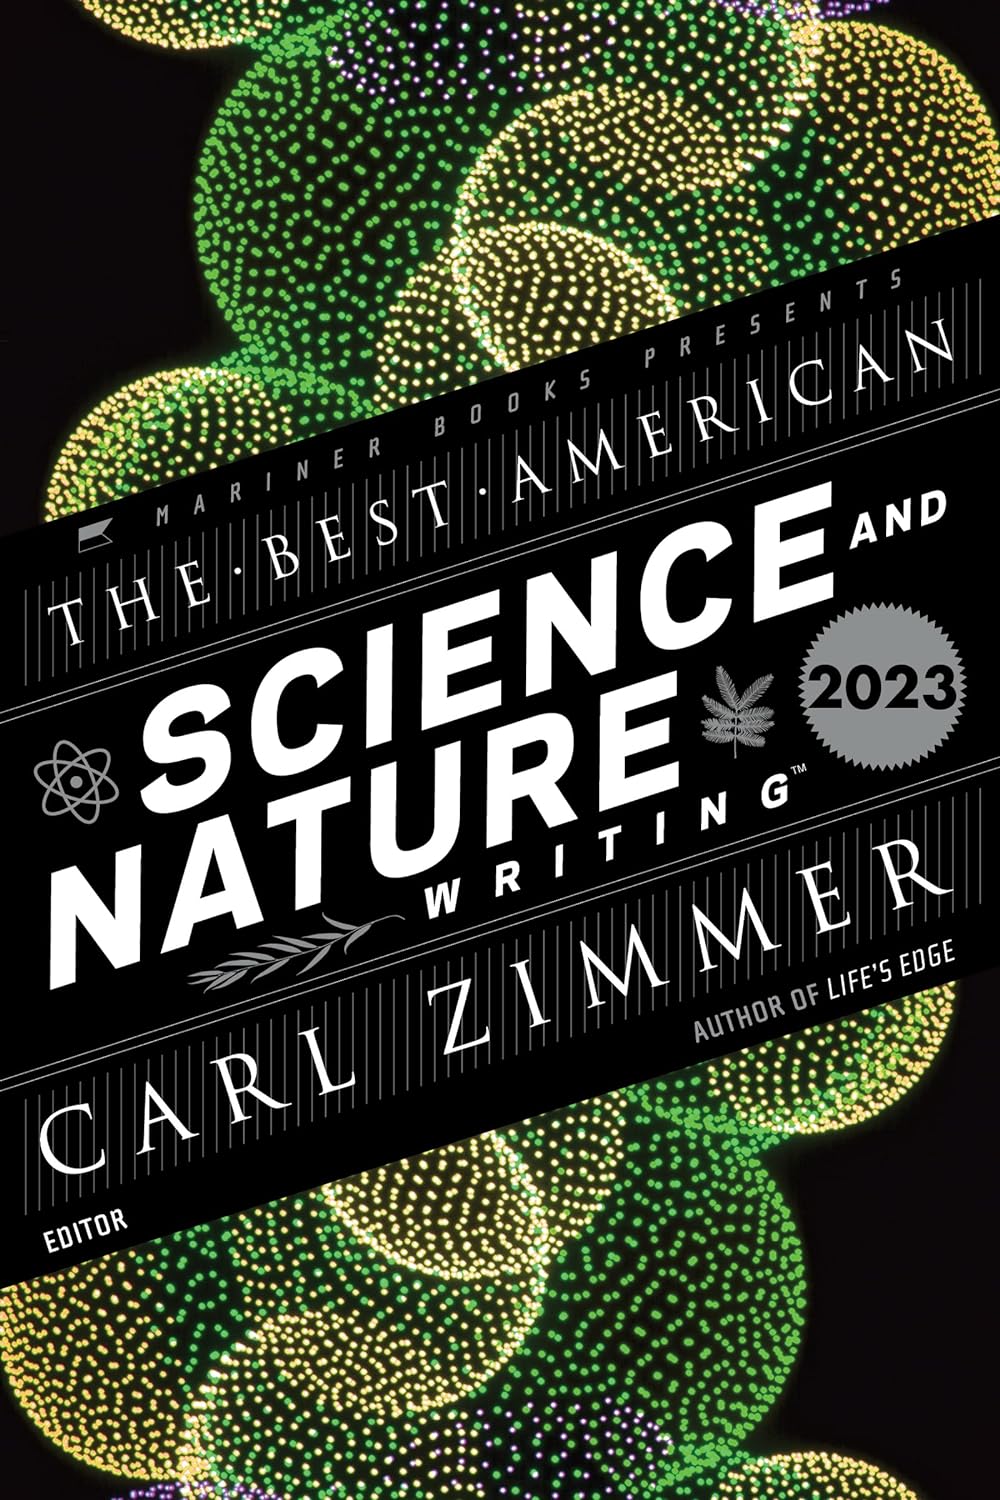 a graphic of the cover of The Best American Science and Nature Writing 2023 edited by Carl Zimmer